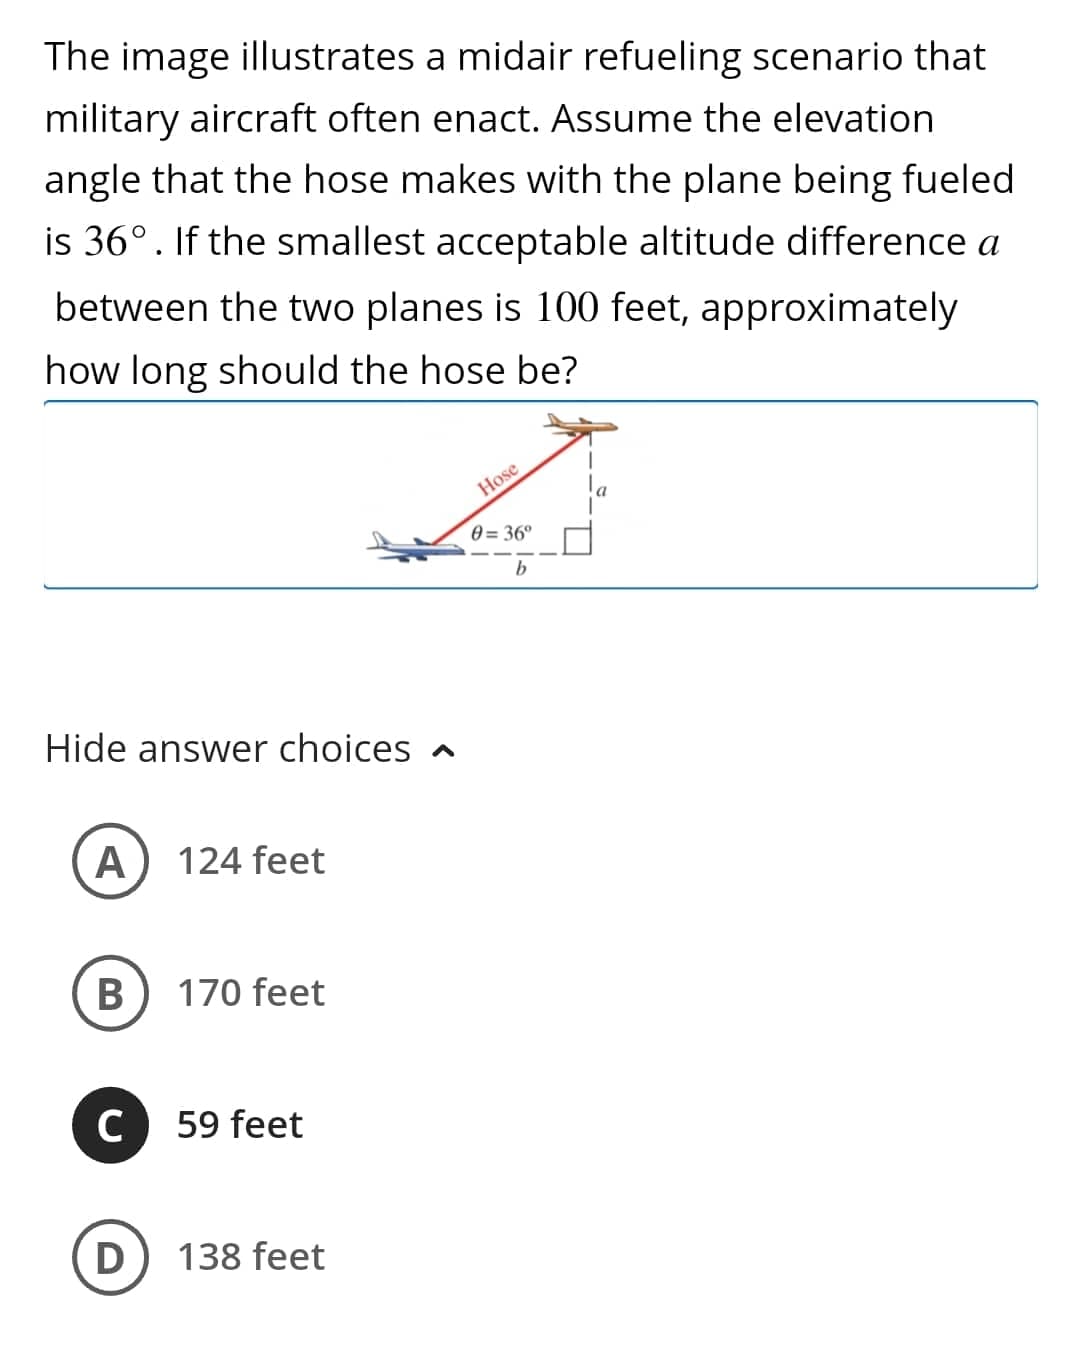 The image illustrates a midair refueling scenario that
military aircraft often enact. Assume the elevation
angle that the hose makes with the plane being fueled
is 36°. If the smallest acceptable altitude difference a
between the two planes is 100 feet, approximately
how long should the hose be?
Hide answer choices
A 124 feet
B
170 feet
C 59 feet
D
138 feet
Hose
0=36°
b